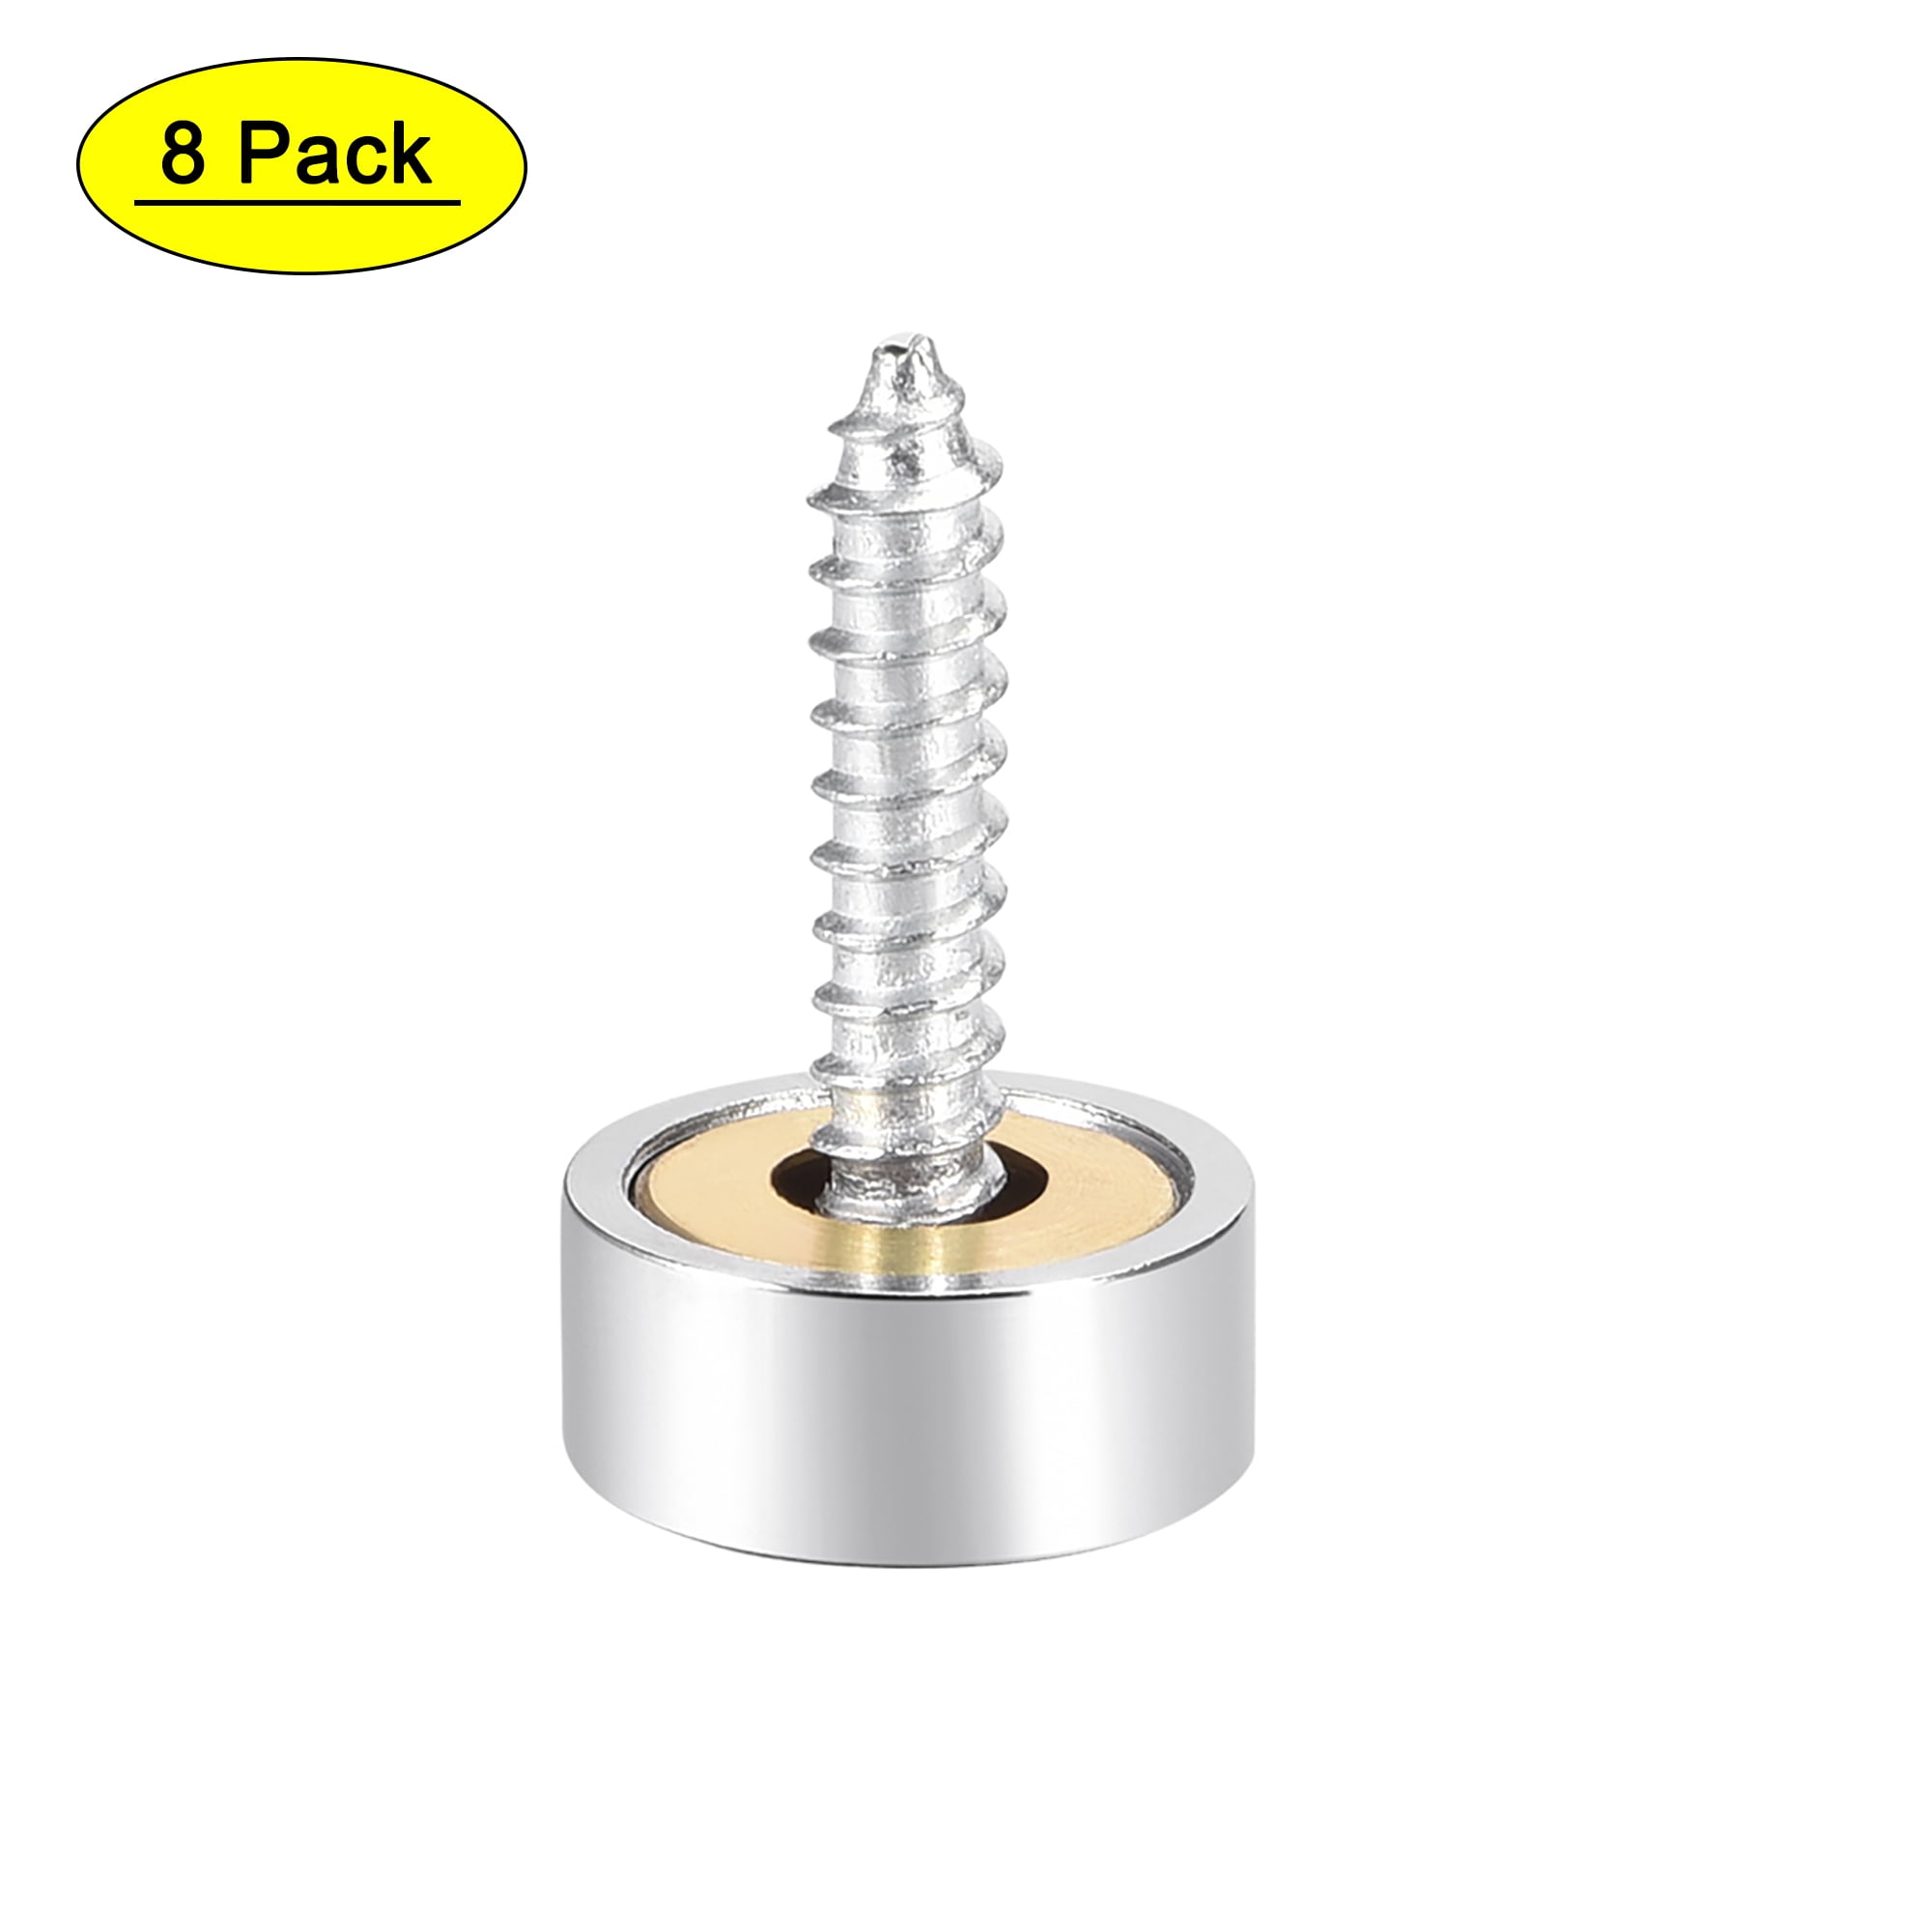 MIRROR / PLAQUE SCREWS WITH CHROME DOME SCREW IN HEAD * PACK OF 4 1 1/2" 45mm 